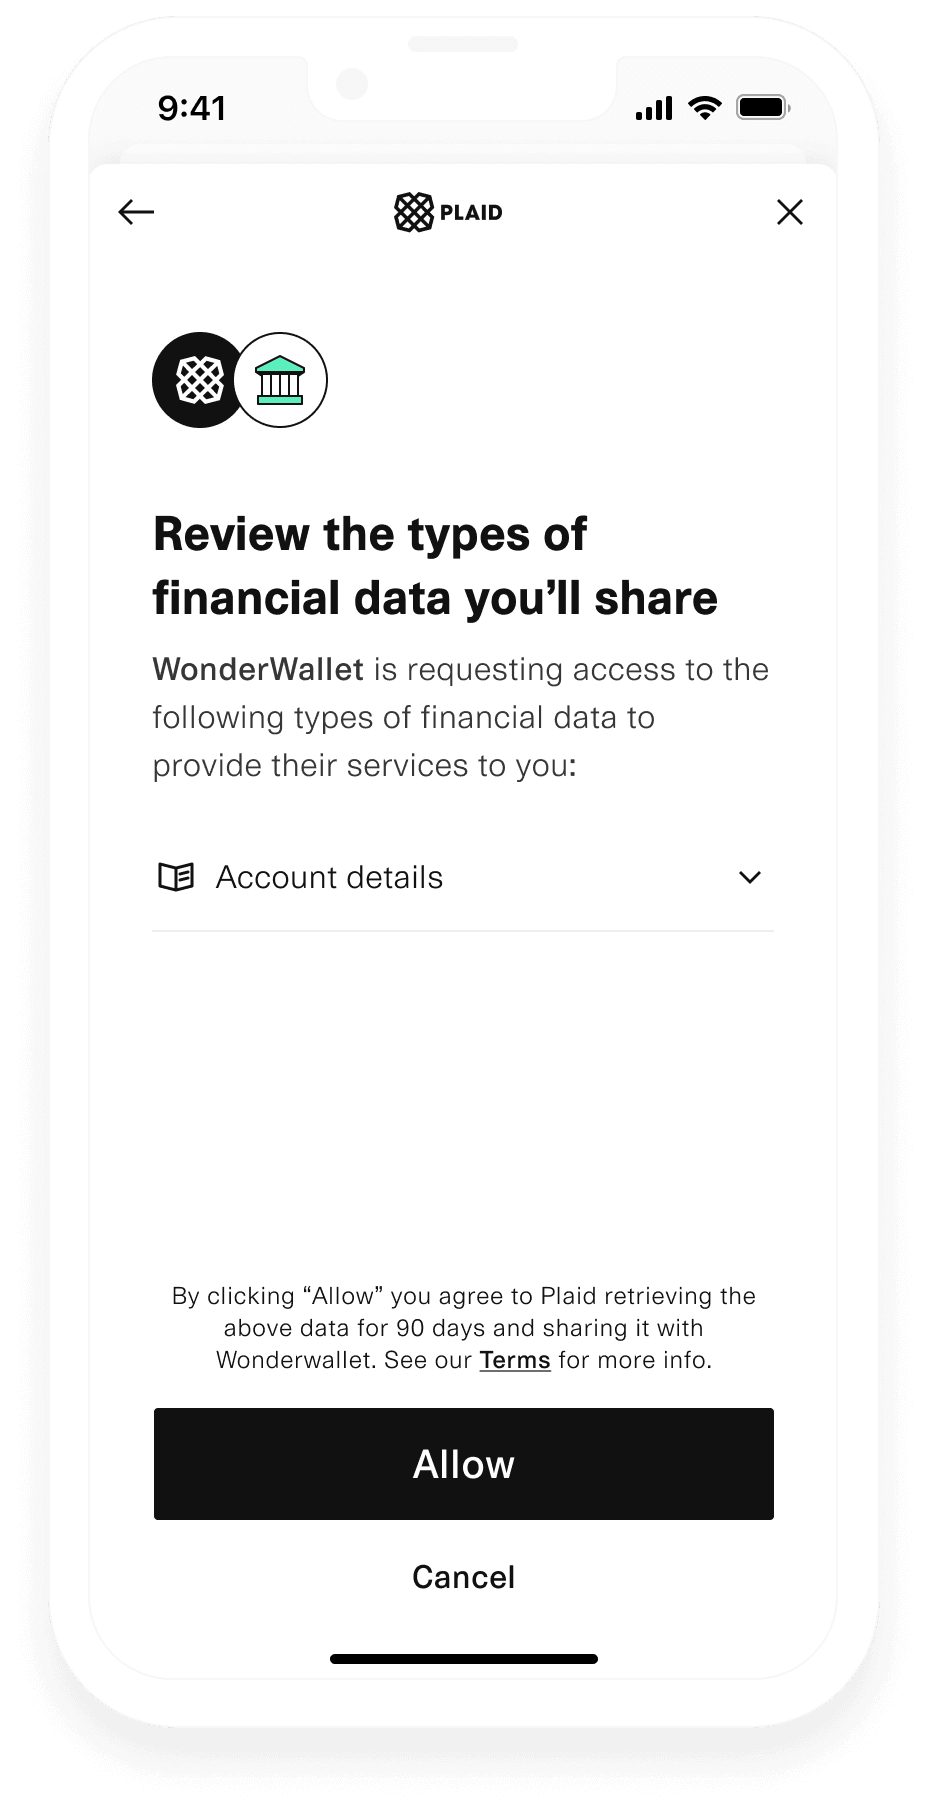 Link pane showing "Review the types of financial data you'sll share: Wonderwallet is requesting access to the following types of financial data to provide their services to you: Account details. By clicking "Allow" you agree to Plaid retrieving the above data for 90 days and sharing it with Wonderwallet. See our terms for more info." Followed by "Allow" and "Cancel" buttons.